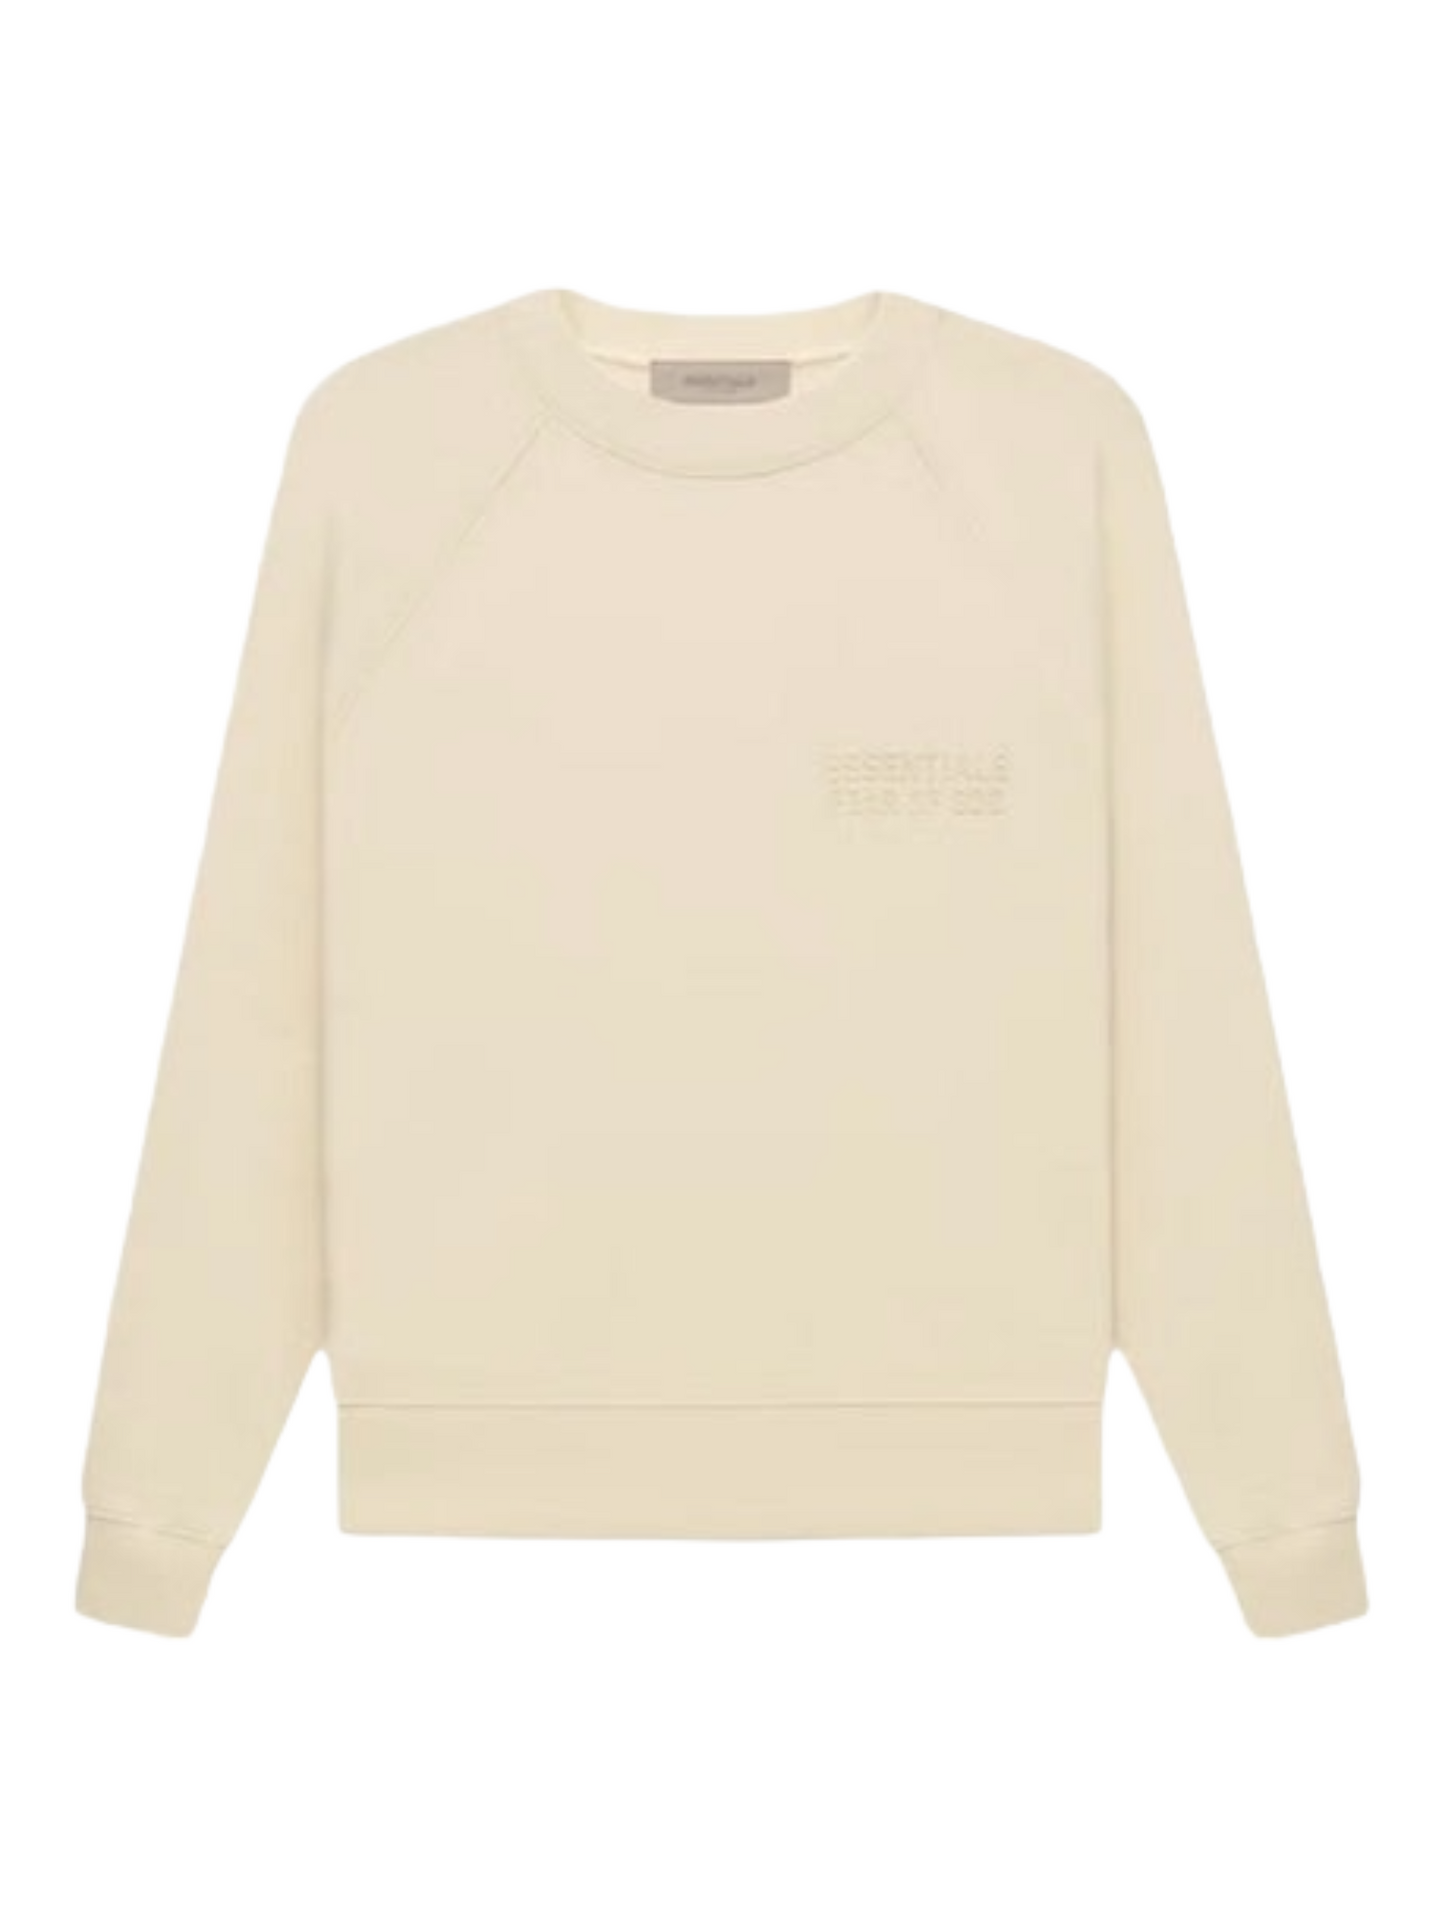 Essentials Fear of God Eggshell Fleece Crewneck Sweater FW22 — Genuine Design Luxury Consignment for Men. New & Pre-Owned Clothing, Shoes, & Accessories. Calgary, Canada